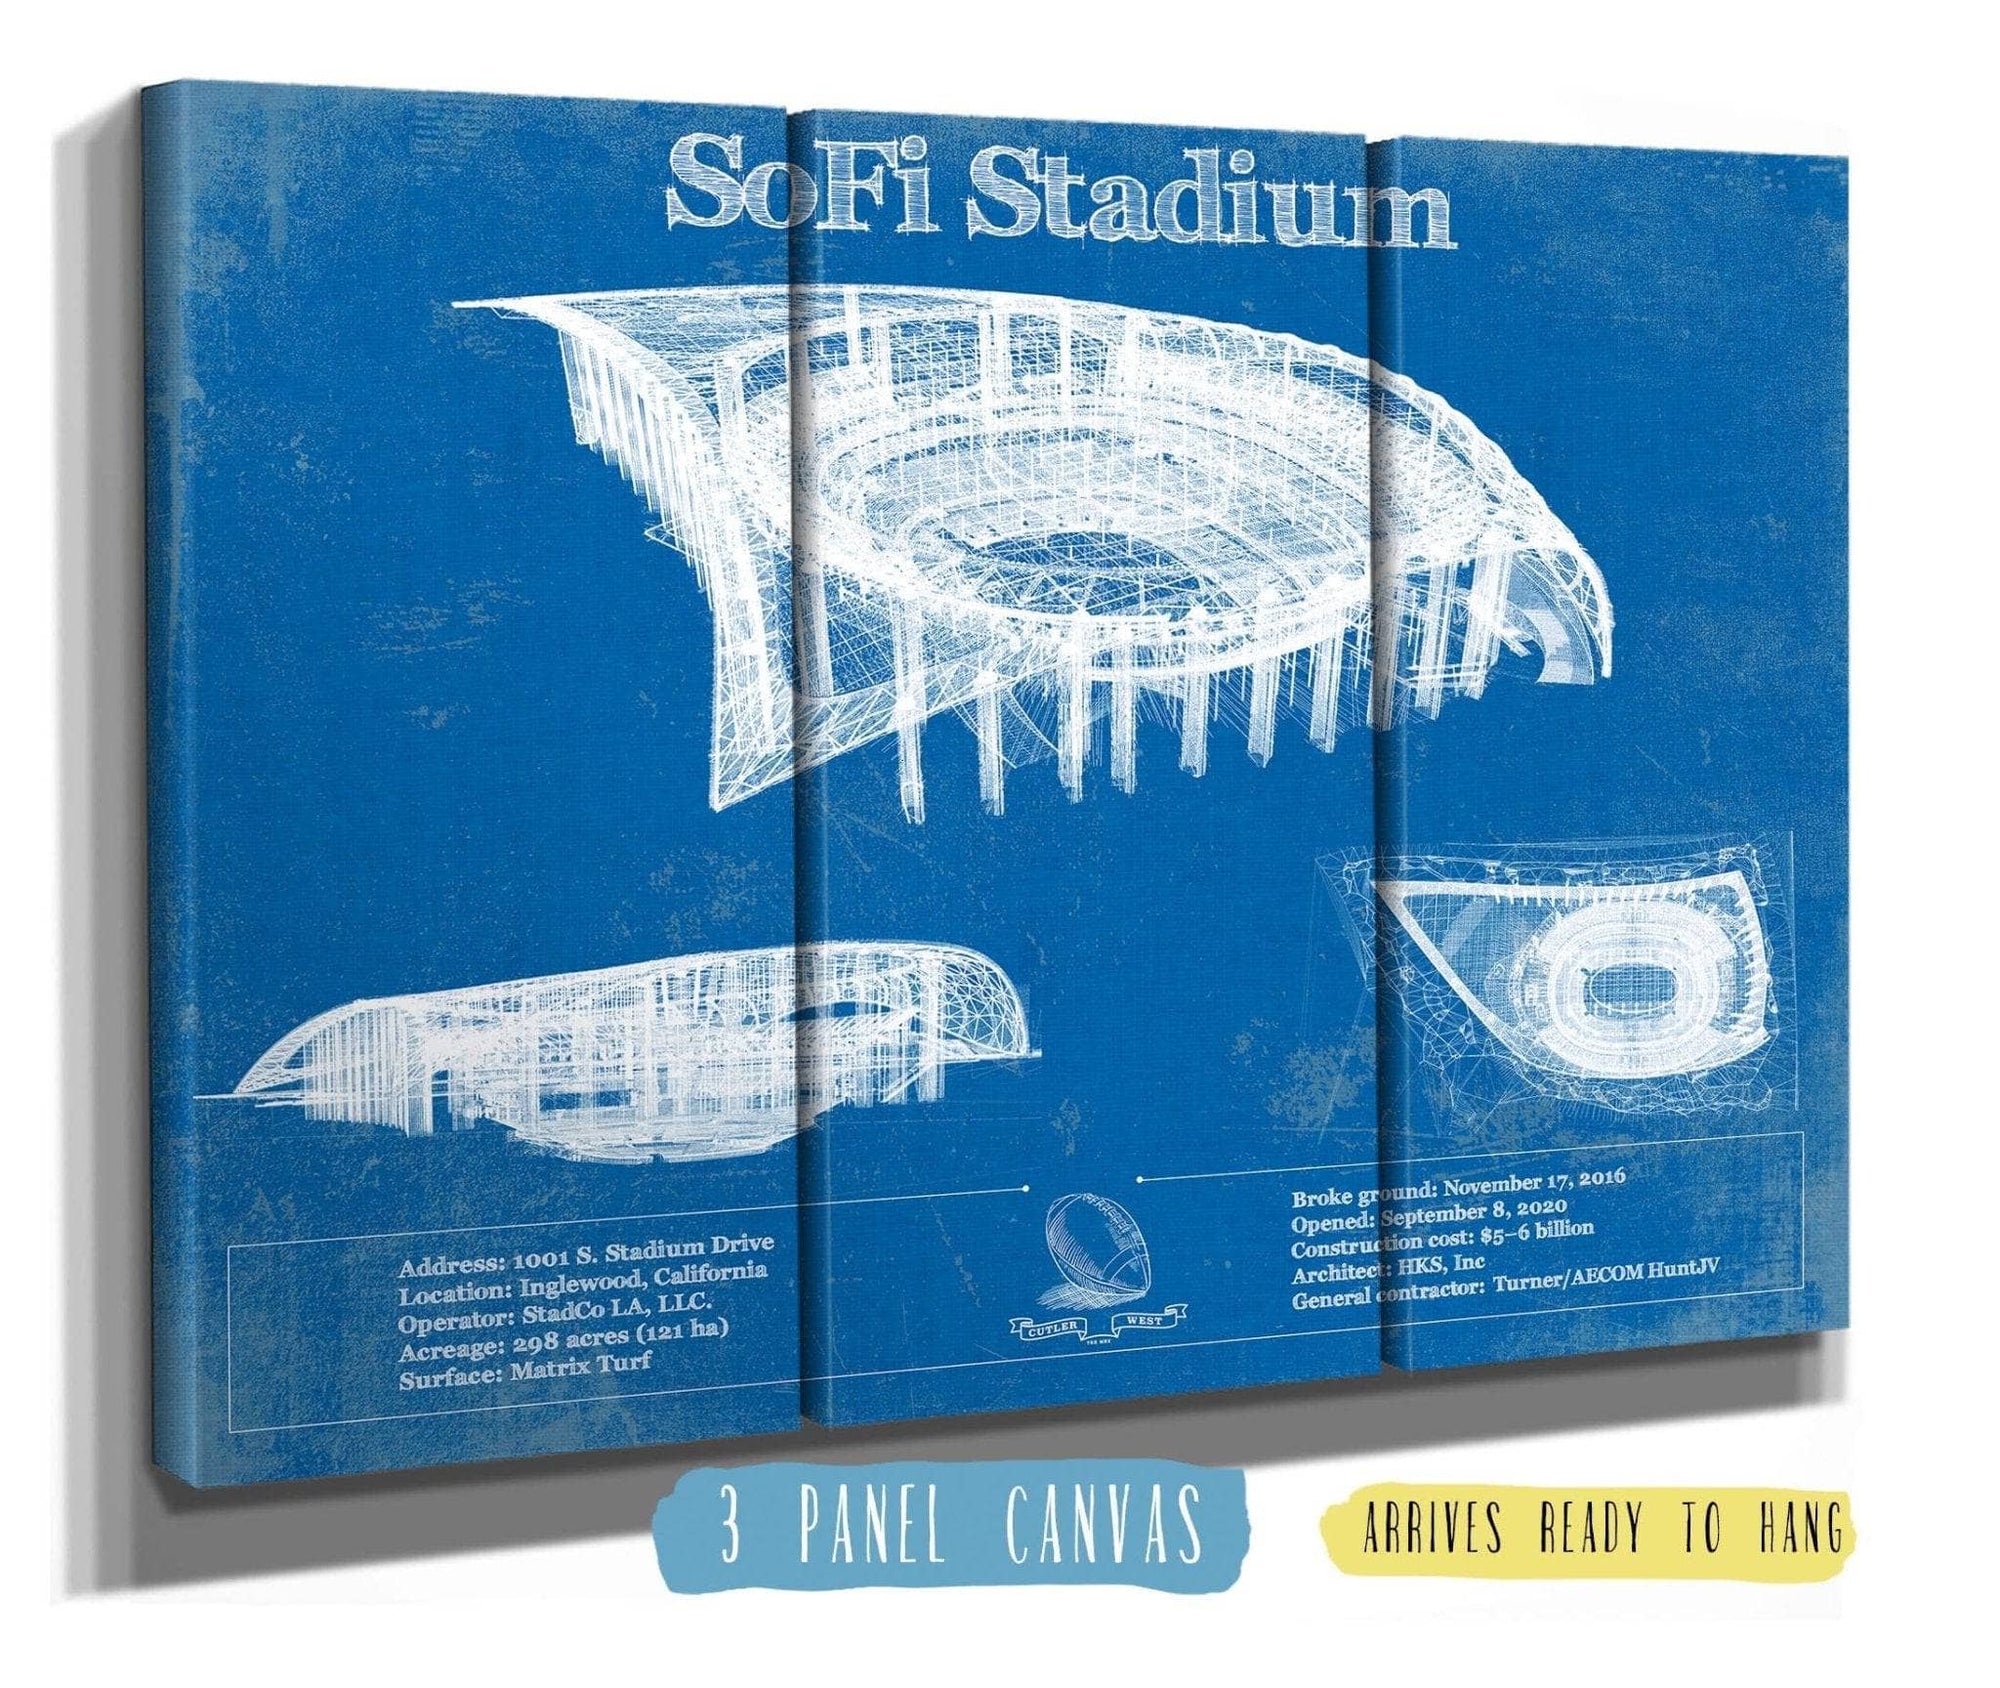 Cutler West Pro Football Collection 48" x 32" / 3 Panel Canvas Wrap Los Angeles Chargers - SoFi Stadium Vintage Football Print 933311013_24054